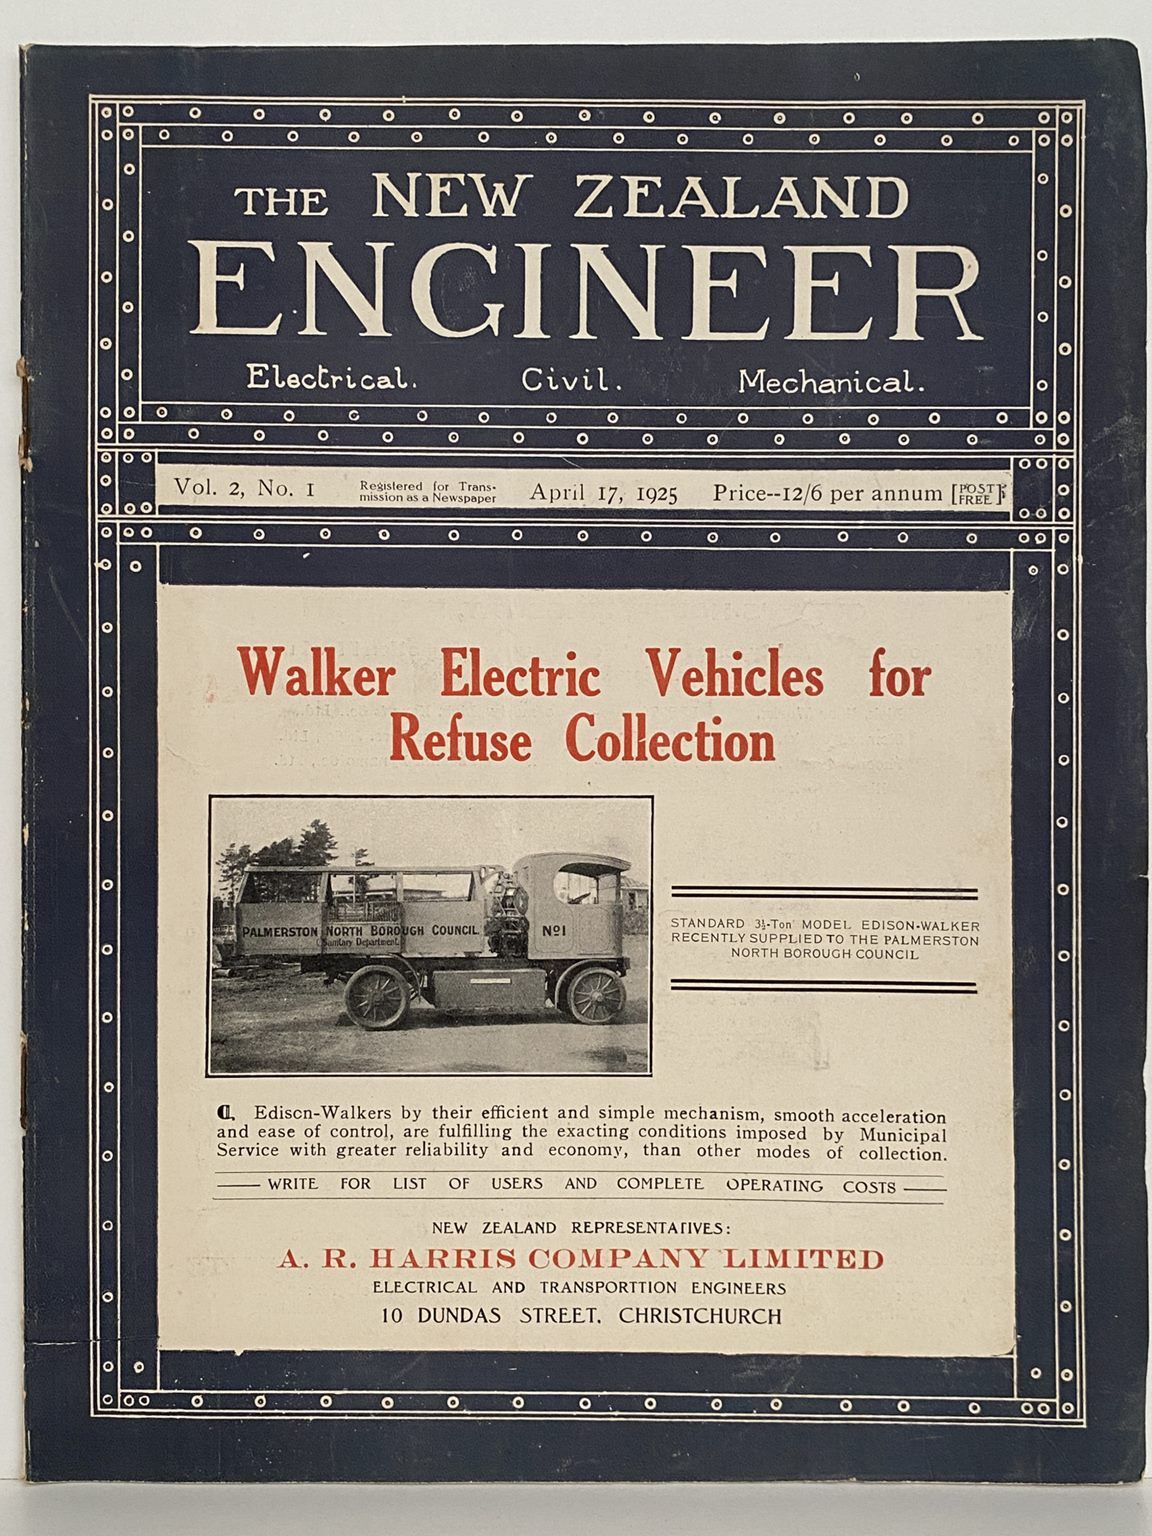 OLD MAGAZINE: The New Zealand Engineer Vol. 2, No. 1 - 17 April 1925